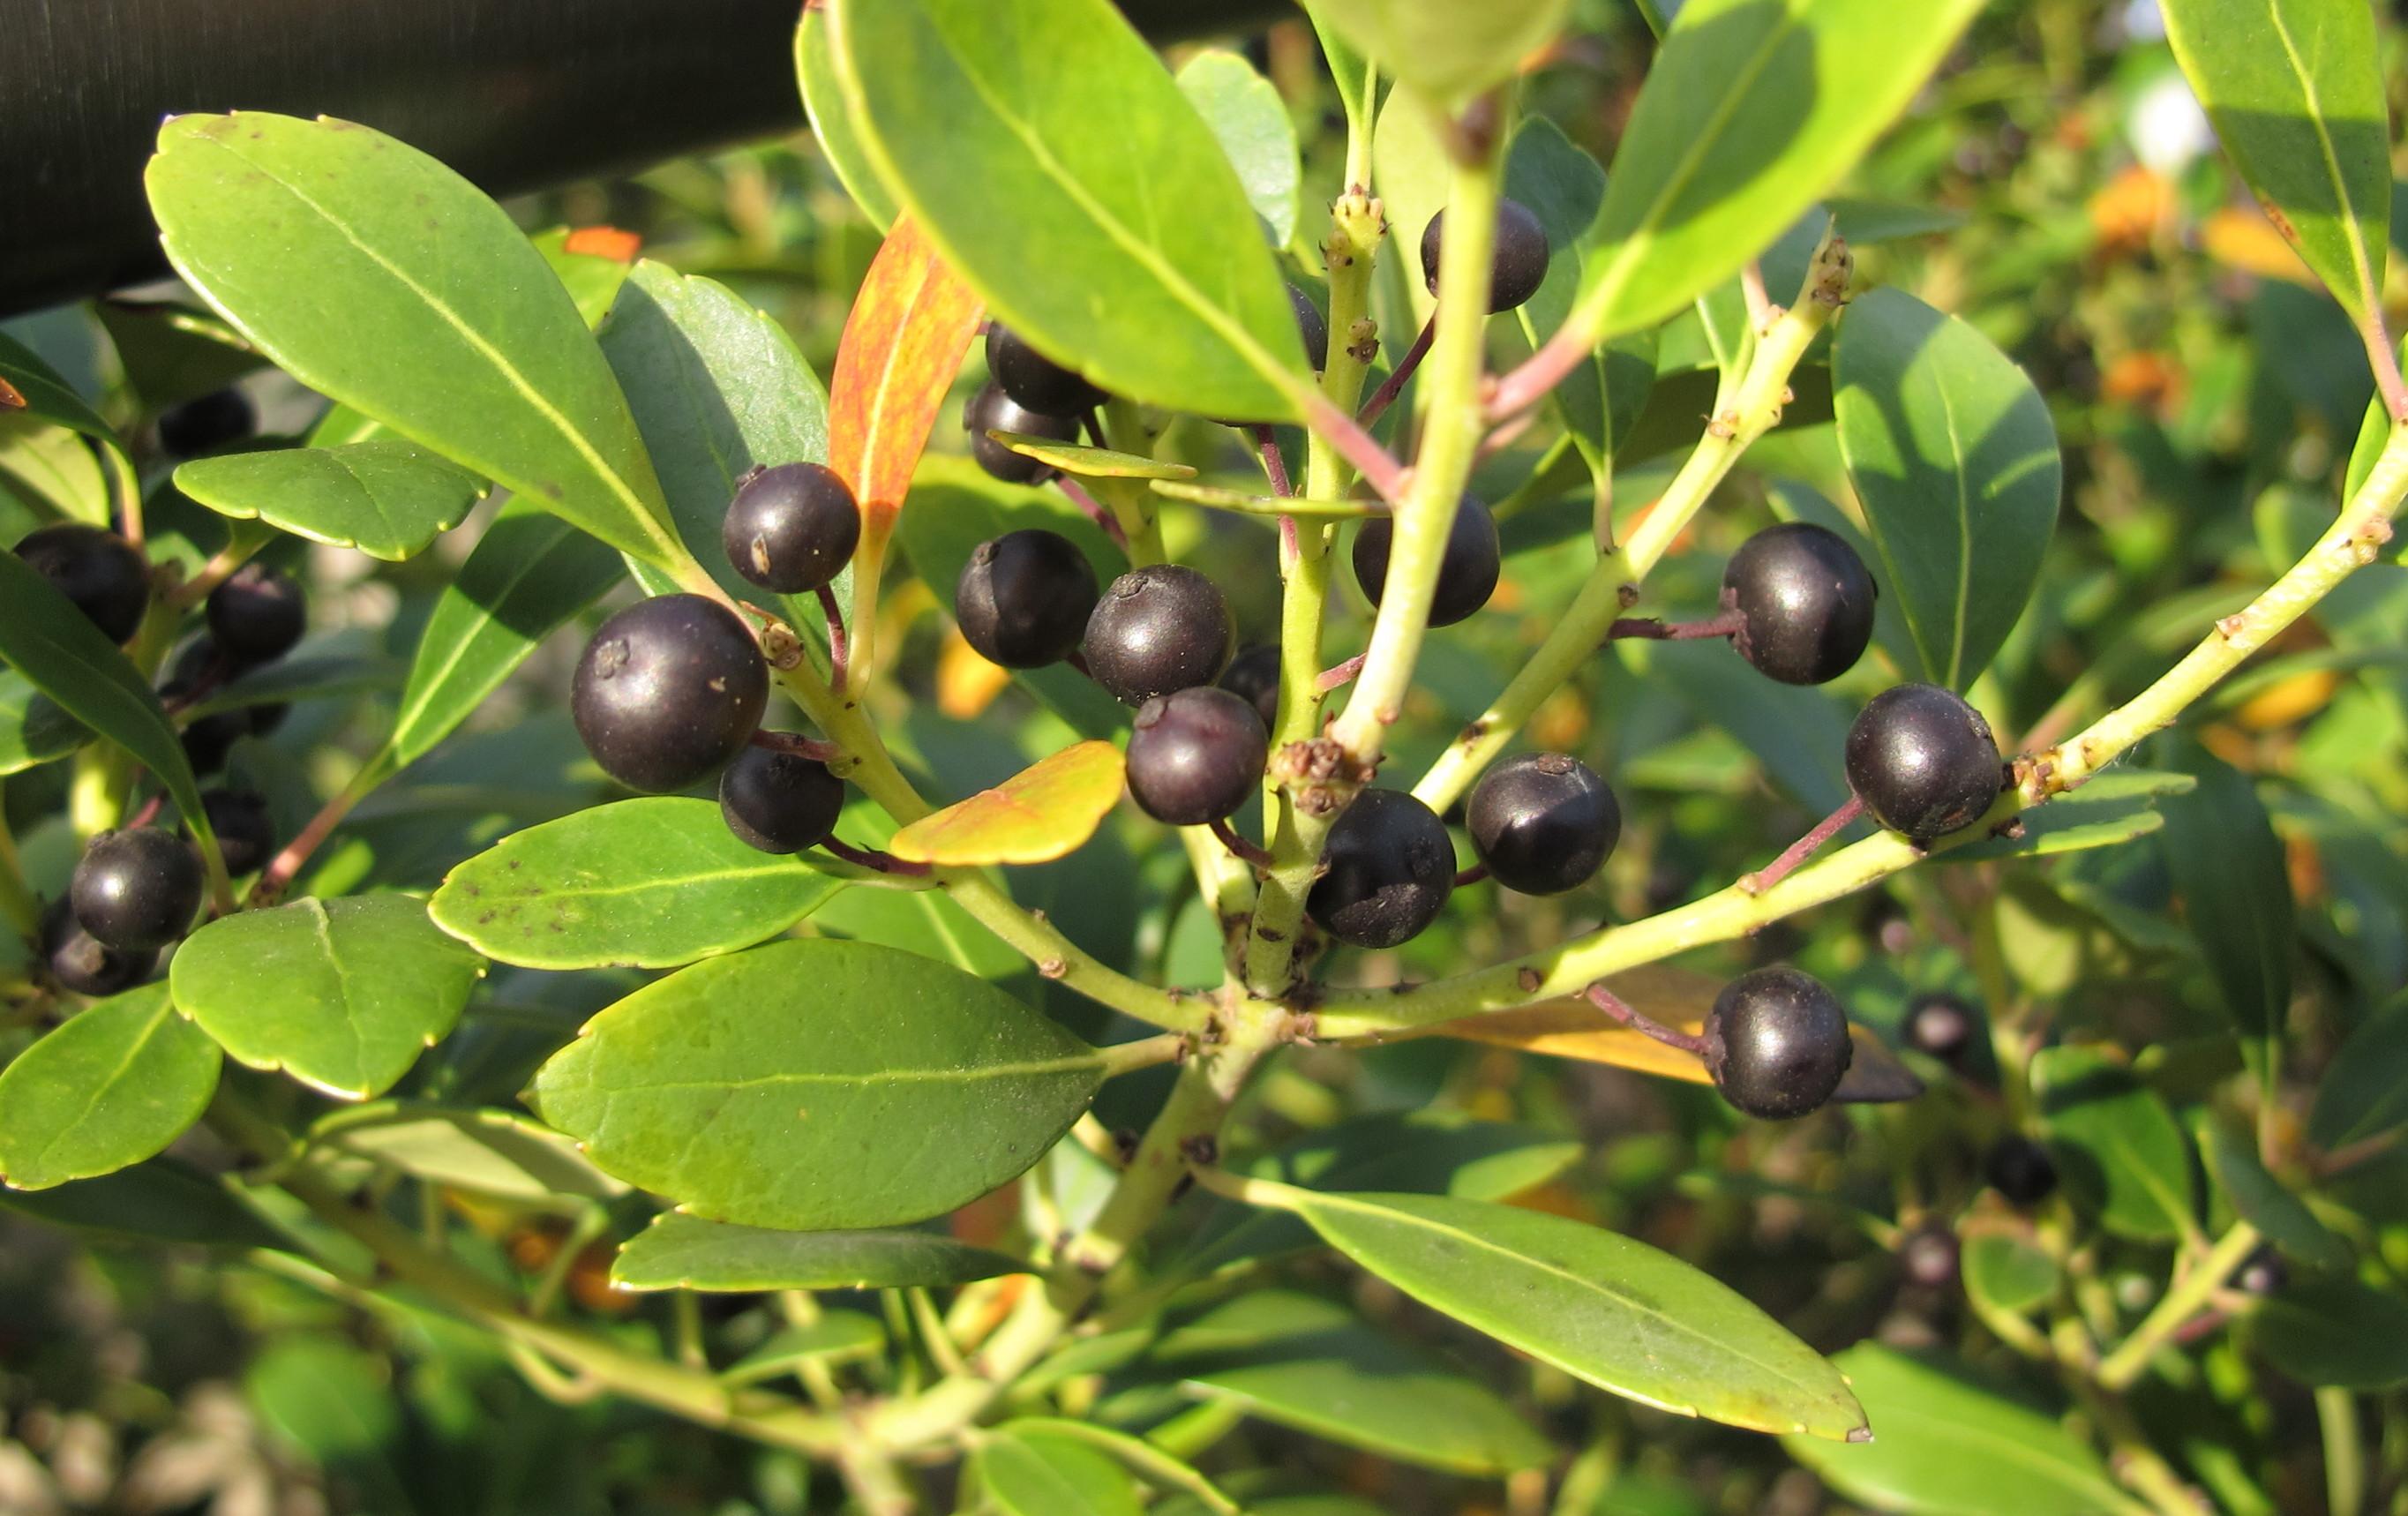 Image of Inkberry holly berries